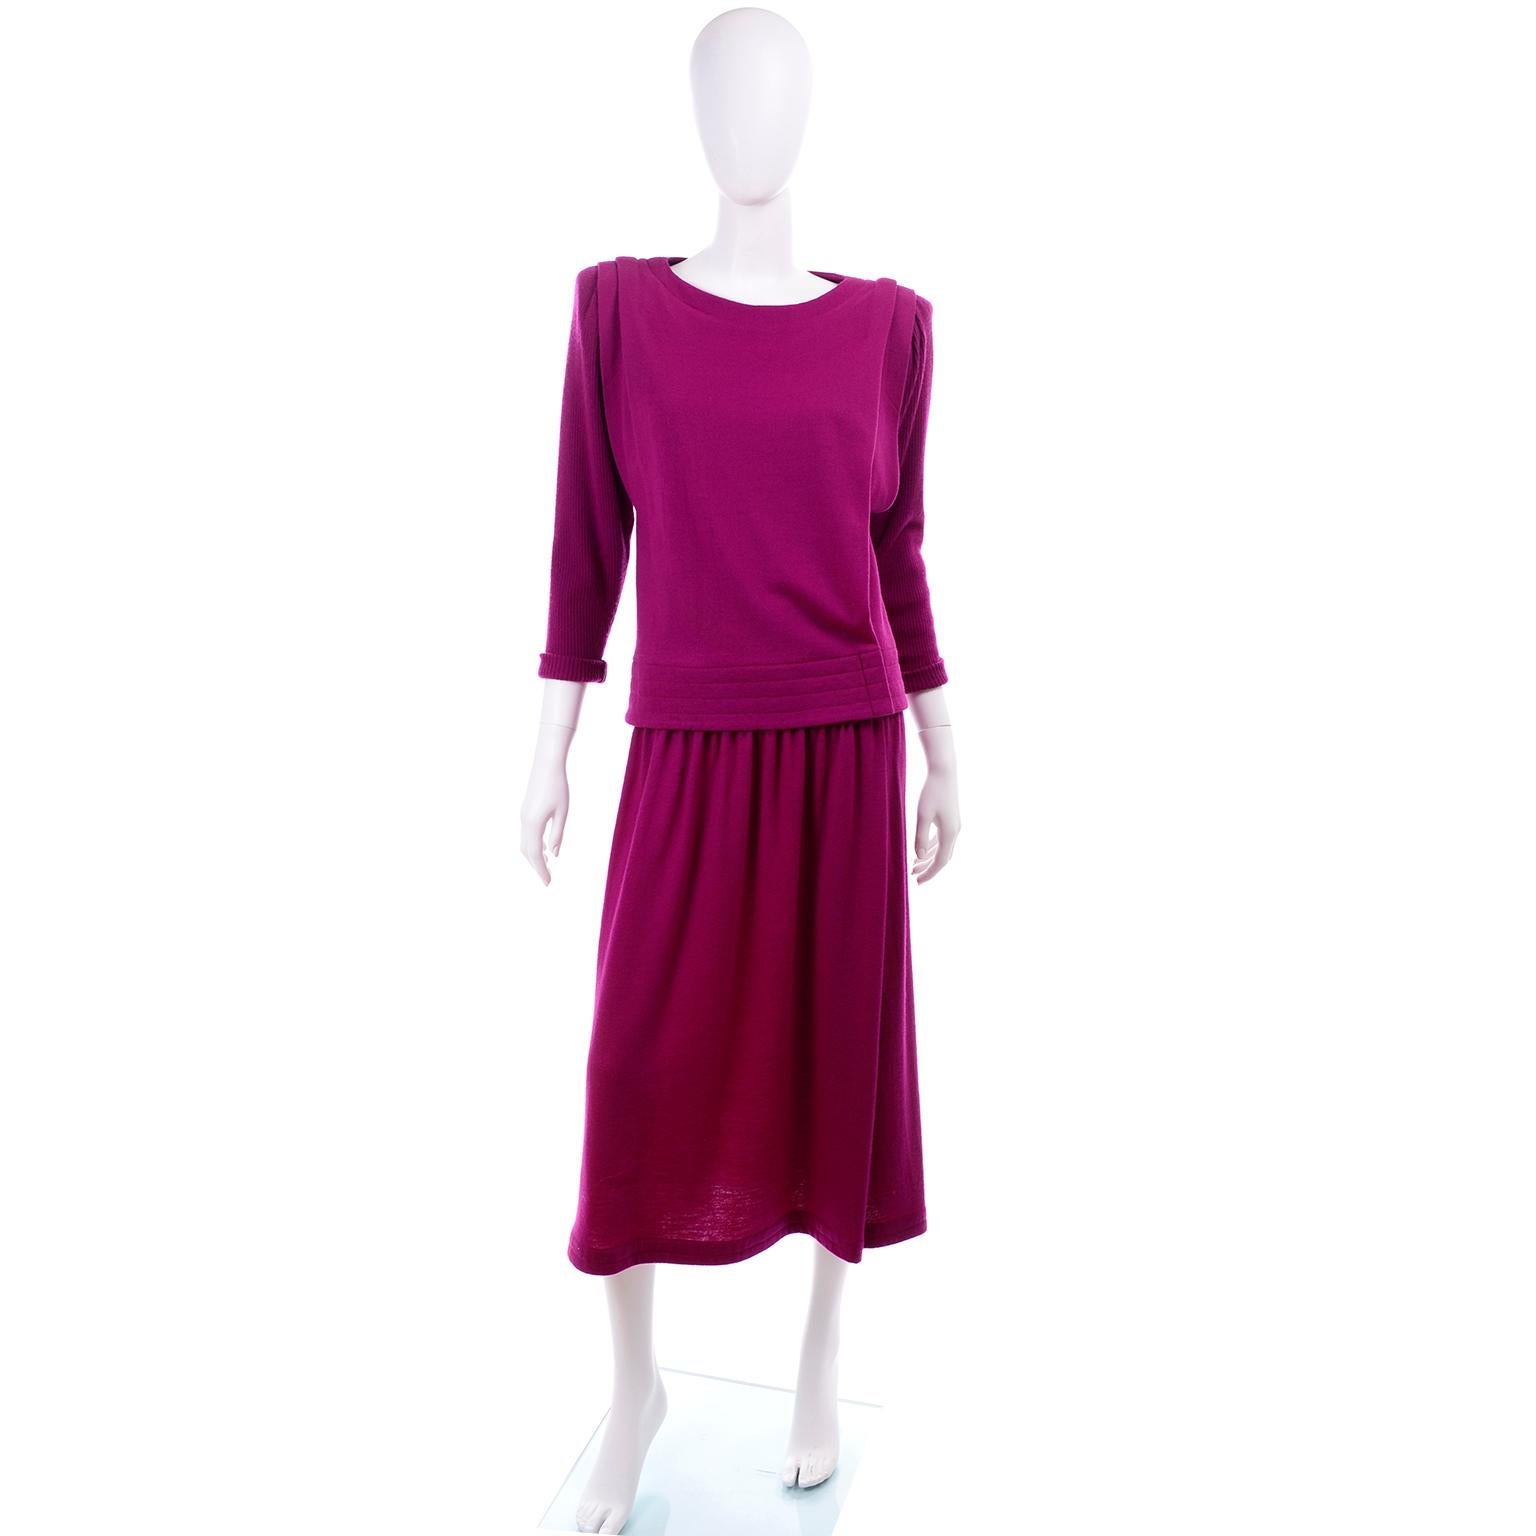 This is a such a great 1980's wool knit two-piece deep fuchsia or magenta pink dress by Norma Walters. We discovered Norma Walters years ago when we bought a high end estate of mainly 1980's clothing. We fell in love with her designs and the quality